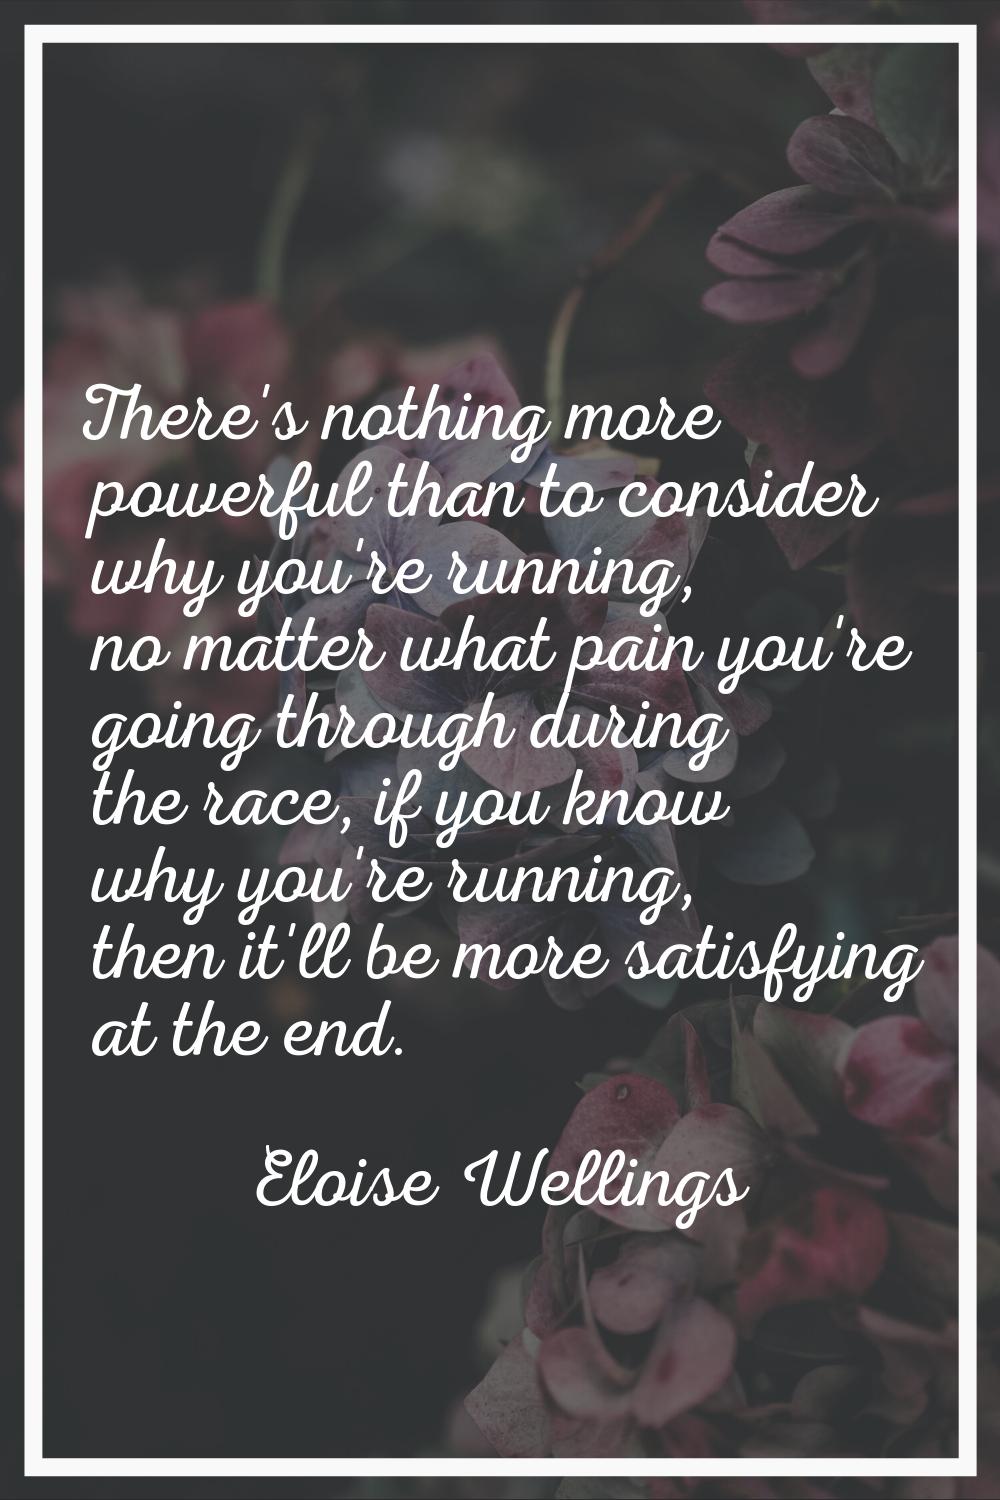 There's nothing more powerful than to consider why you're running, no matter what pain you're going